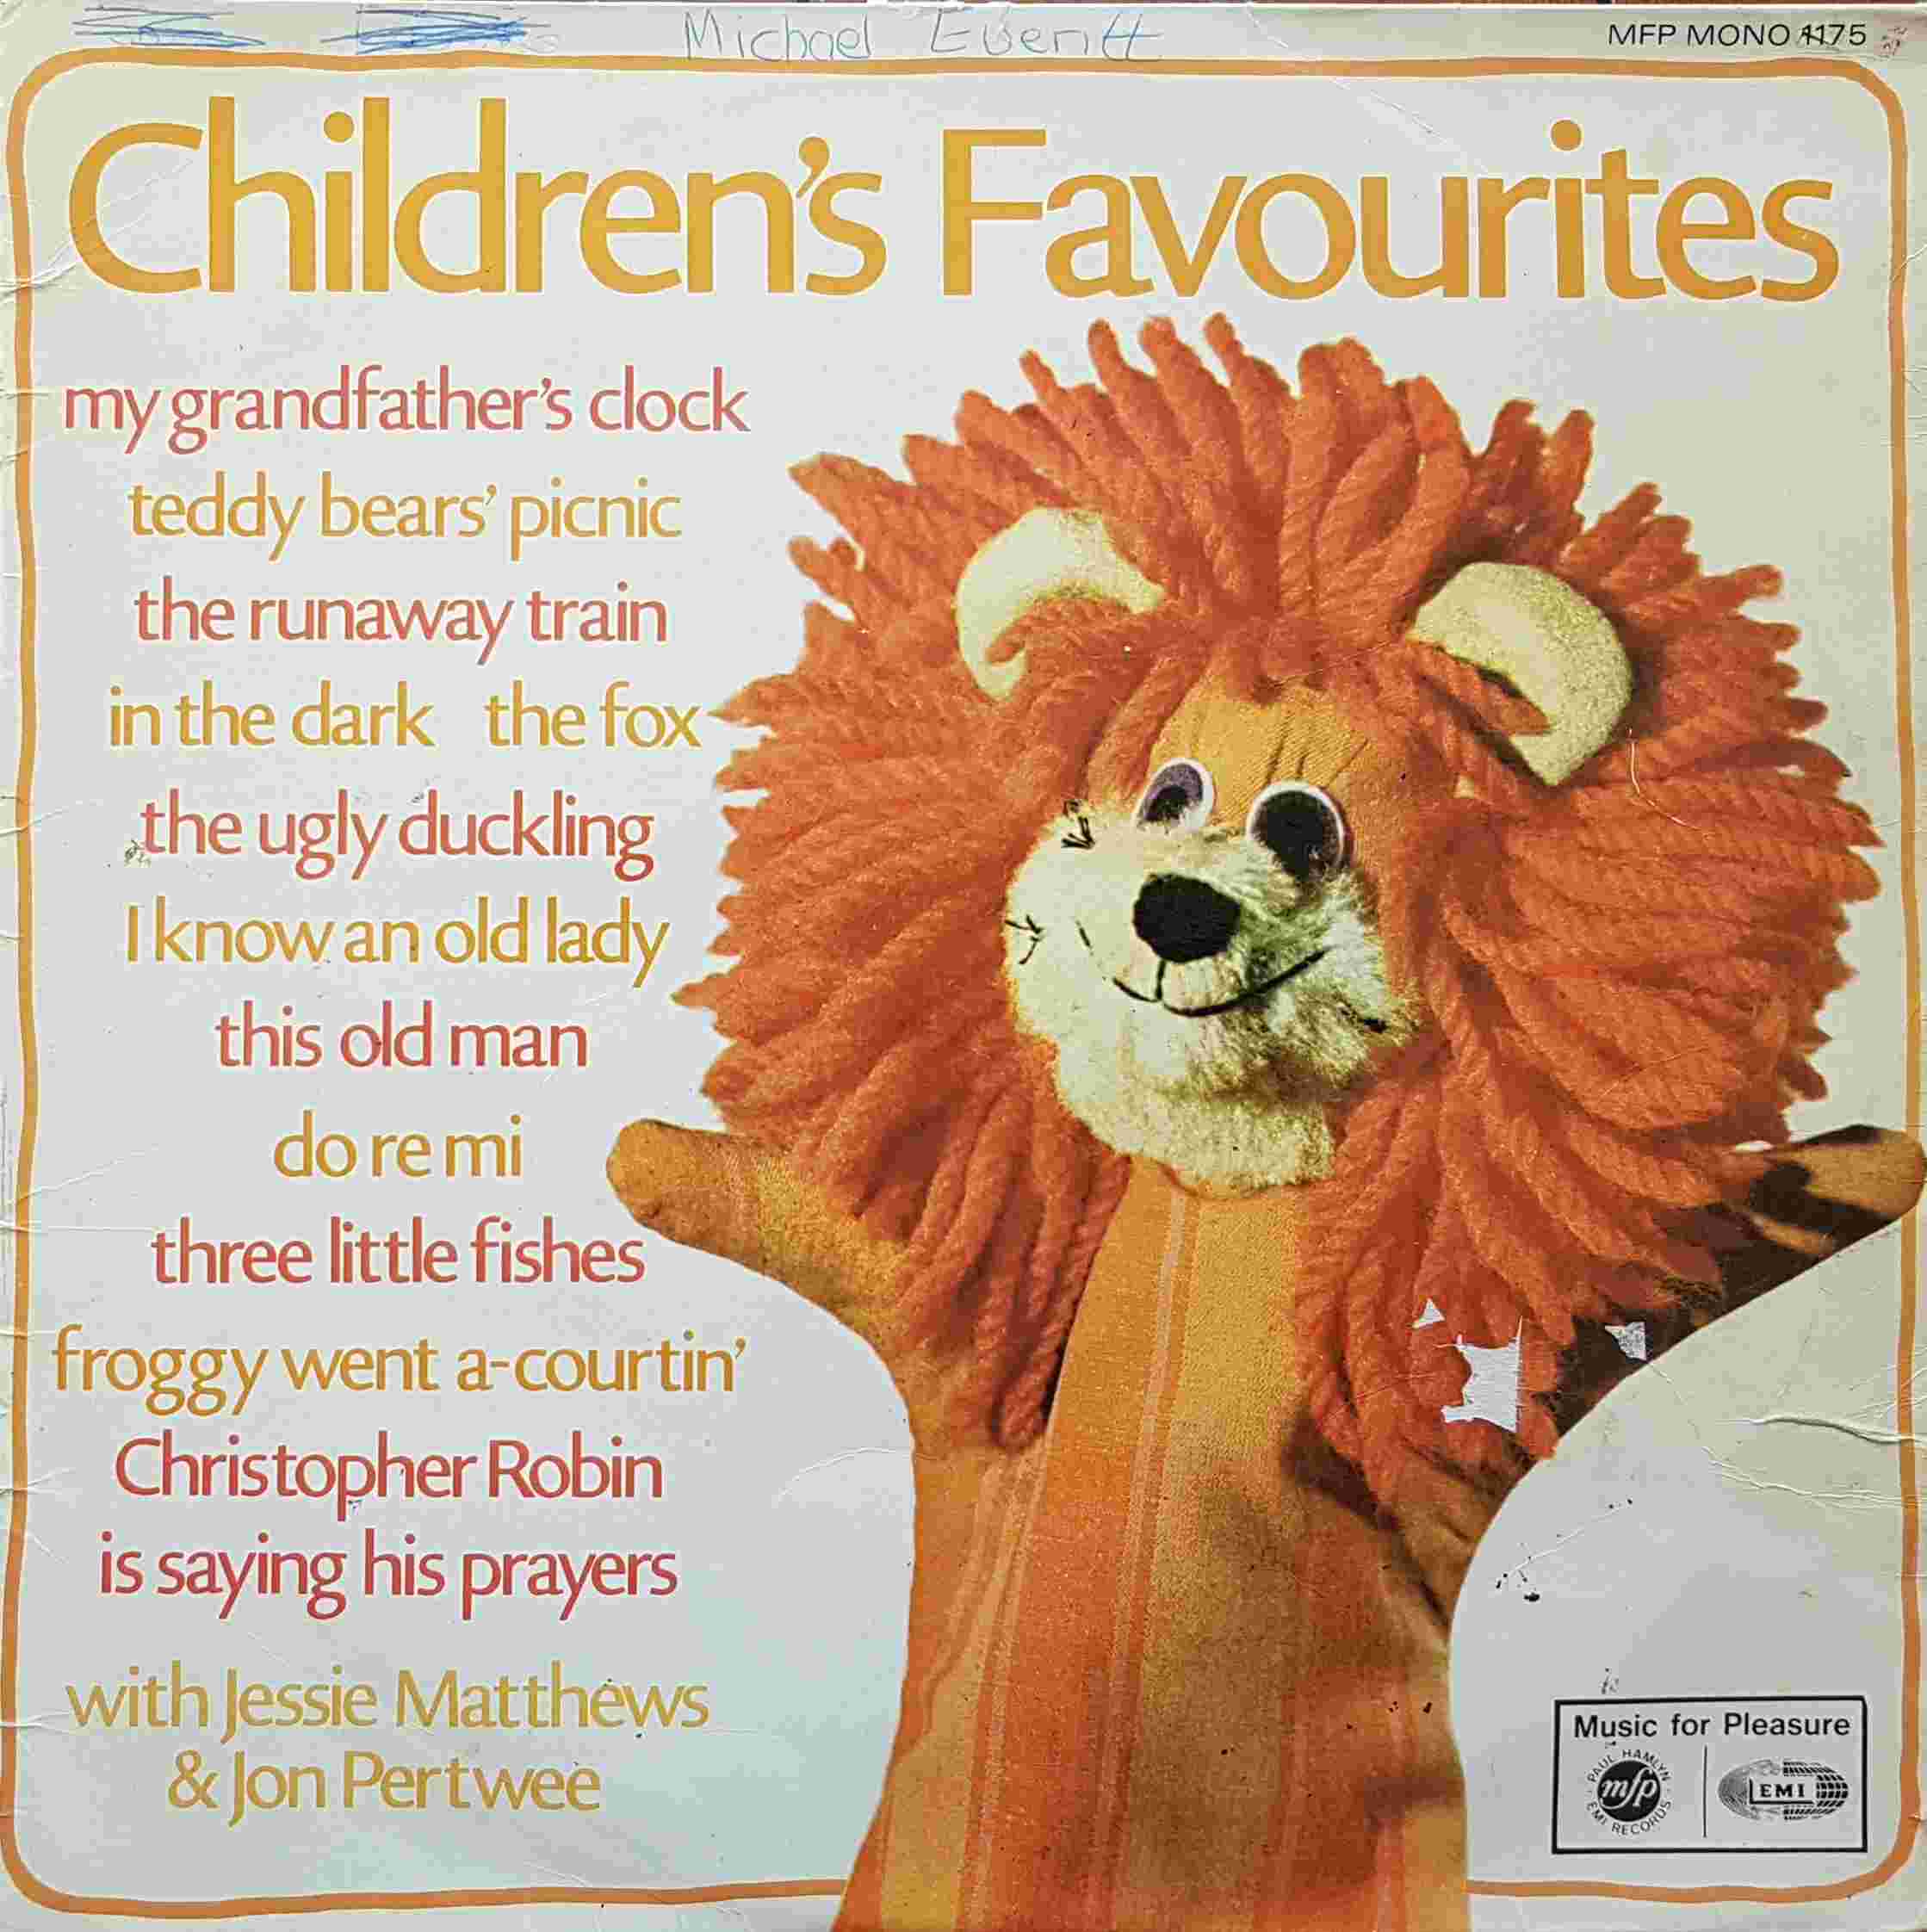 Picture of MFP 1175 Children's favourites by artist Various from ITV, Channel 4 and Channel 5 albums library